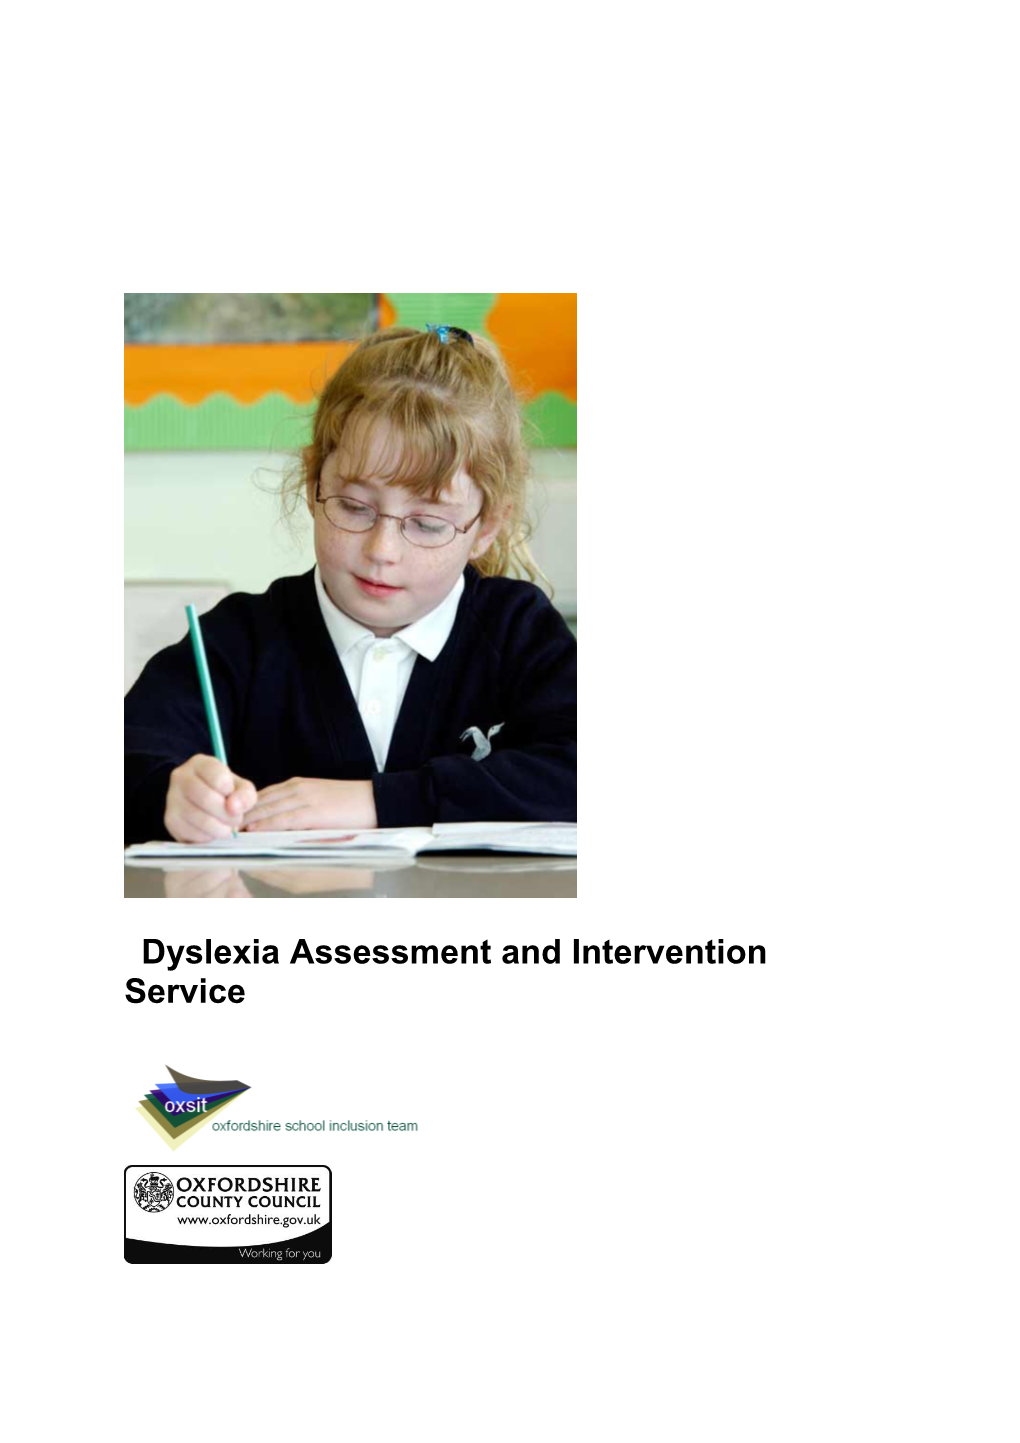 Dyslexia Assessment and Intervention Service